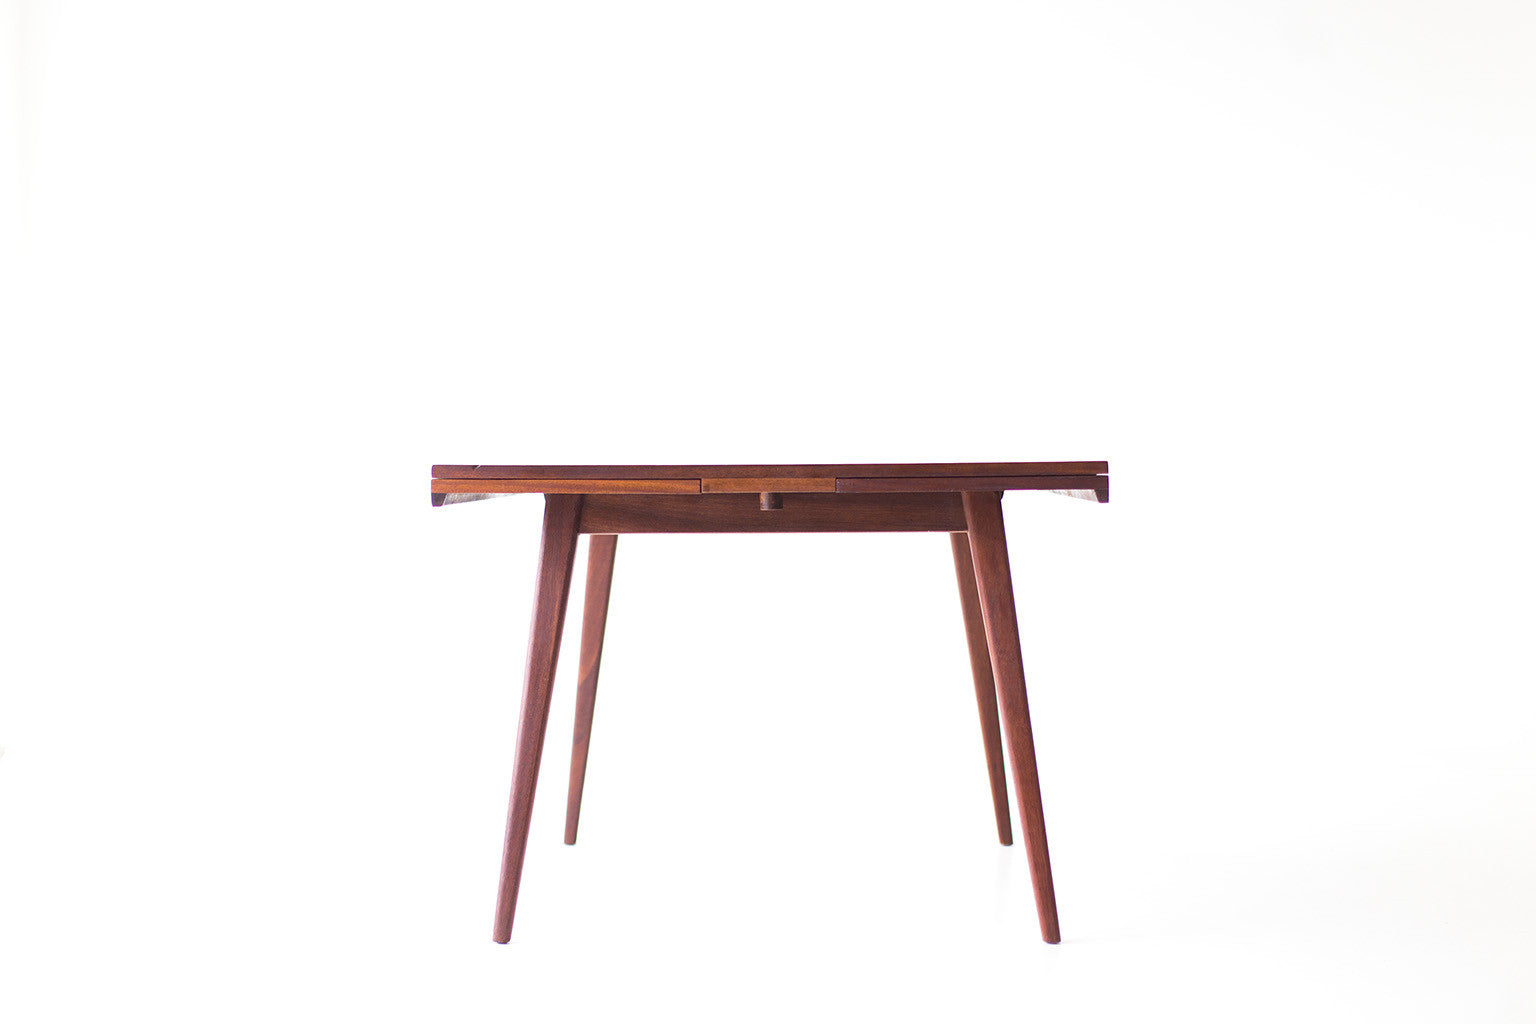 early-jens-risom-dining-table-012416-01-01